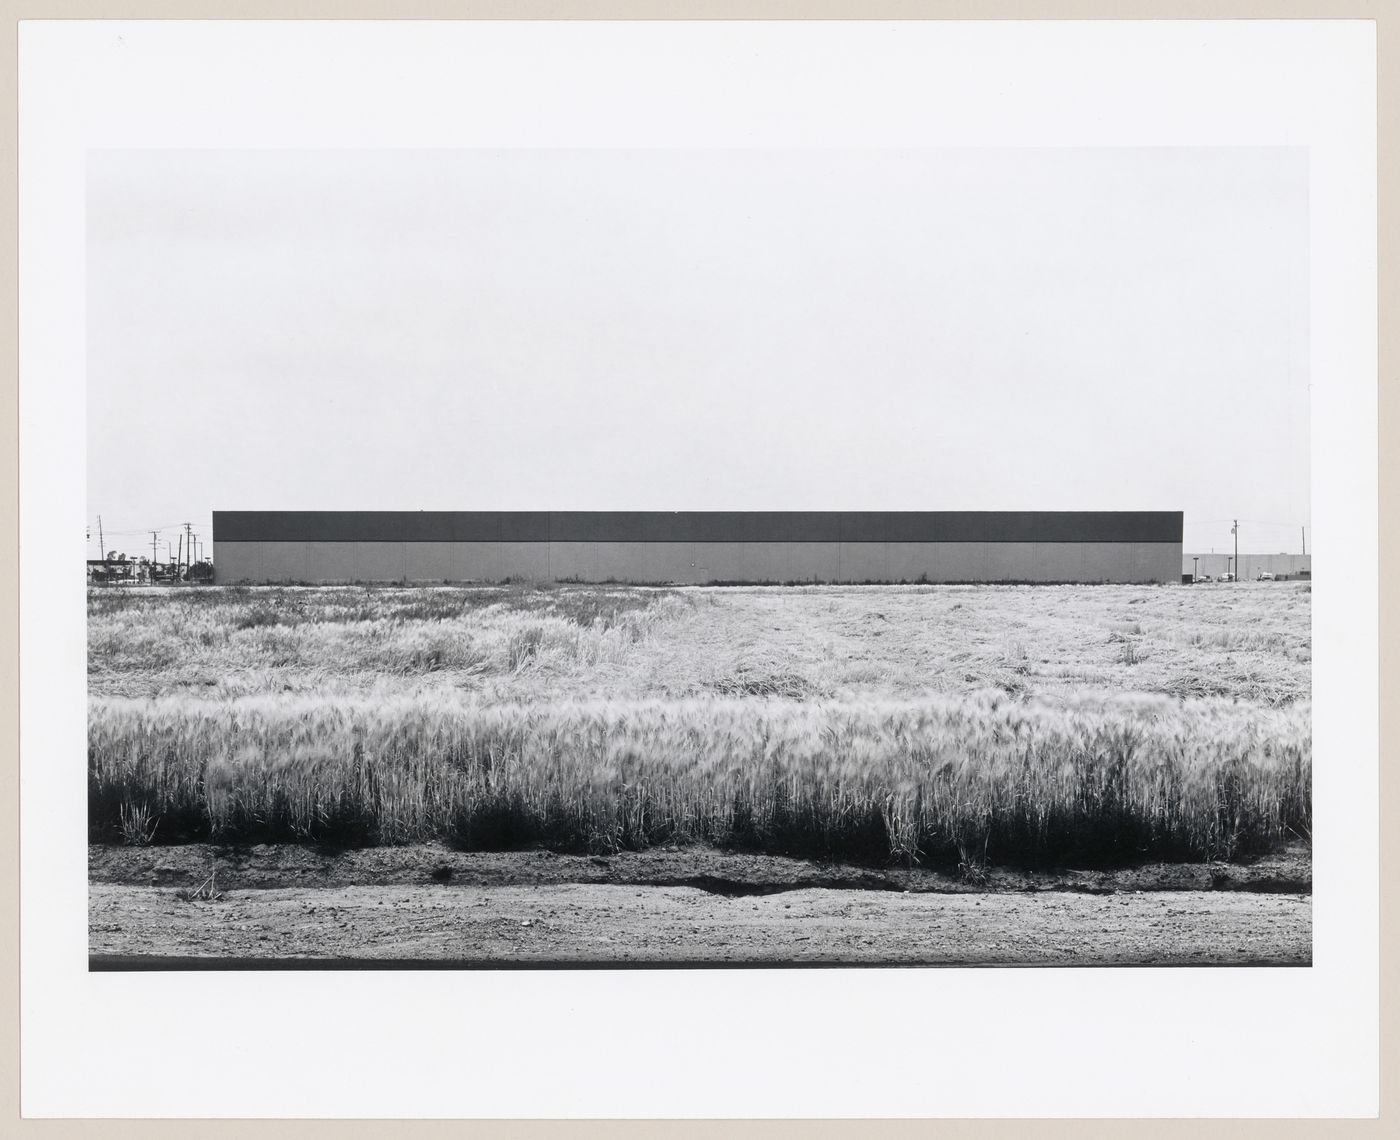 View of the east wall of Western Carpet Mills, 1231 Warner, Tustin, California, United States, from the series “The new Industrial Parks near Irvine, California”